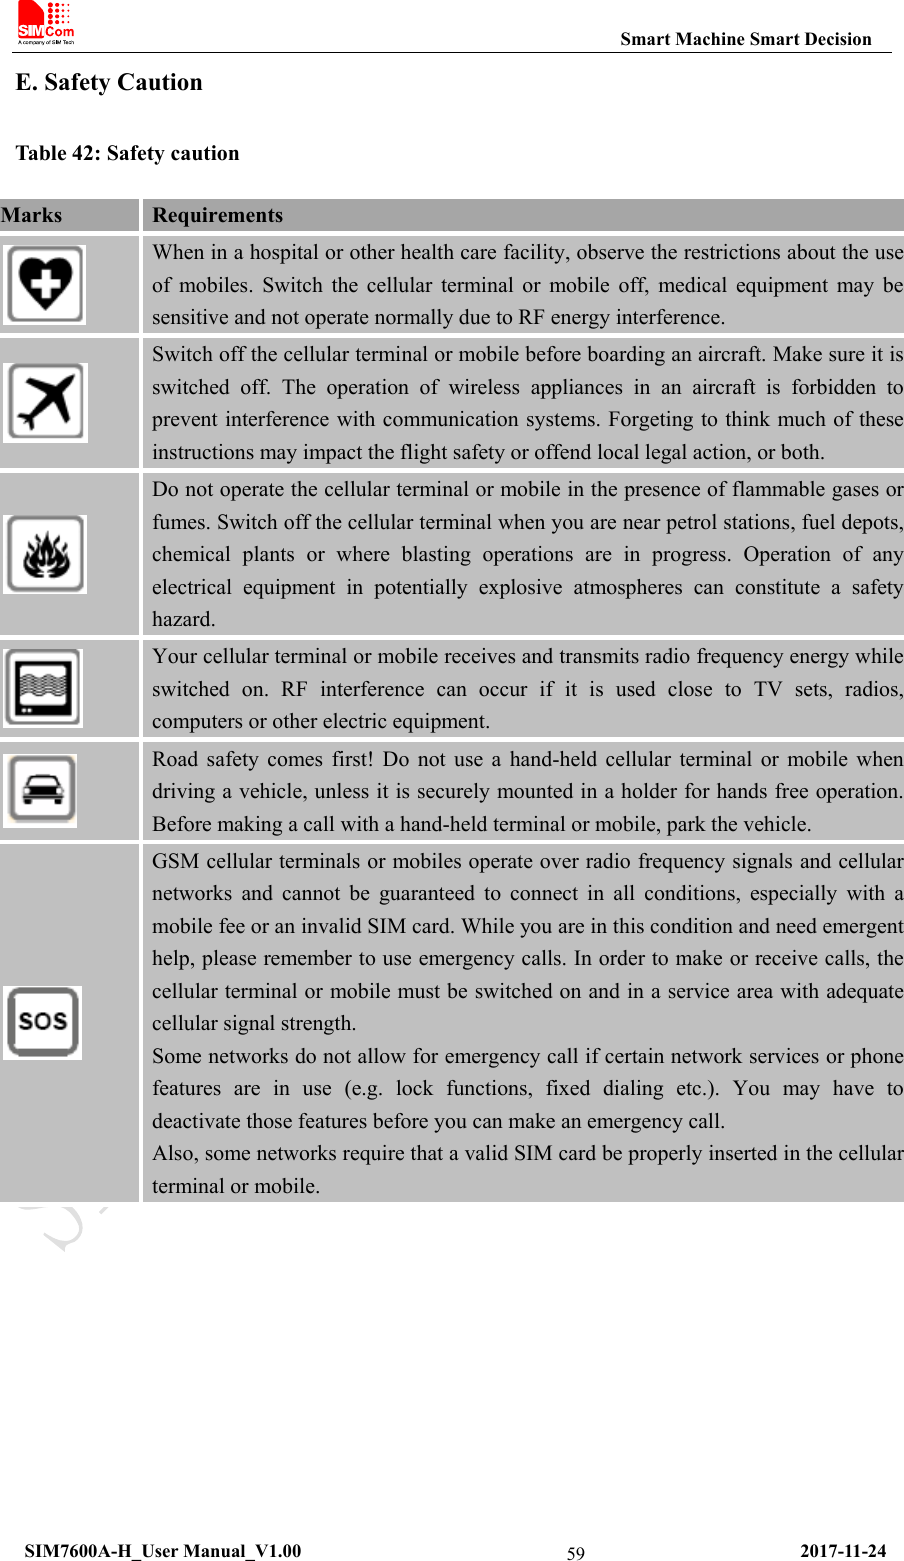                                                           Smart Machine Smart Decision  SIM7600A-H_User Manual_V1.00                                                     2017-11-24 59E. Safety Caution Table 42: Safety caution Marks  Requirements  When in a hospital or other health care facility, observe the restrictions about the use of mobiles. Switch the cellular terminal or mobile off, medical equipment may be sensitive and not operate normally due to RF energy interference.  Switch off the cellular terminal or mobile before boarding an aircraft. Make sure it is switched off. The operation of wireless appliances in an aircraft is forbidden to prevent interference with communication systems. Forgeting to think much of these instructions may impact the flight safety or offend local legal action, or both.  Do not operate the cellular terminal or mobile in the presence of flammable gases or fumes. Switch off the cellular terminal when you are near petrol stations, fuel depots, chemical plants or where blasting operations are in progress. Operation of any electrical equipment in potentially explosive atmospheres can constitute a safety hazard.  Your cellular terminal or mobile receives and transmits radio frequency energy while switched on. RF interference can occur if it is used close to TV sets, radios, computers or other electric equipment.  Road safety comes first! Do not use a hand-held cellular terminal or mobile when driving a vehicle, unless it is securely mounted in a holder for hands free operation. Before making a call with a hand-held terminal or mobile, park the vehicle.  GSM cellular terminals or mobiles operate over radio frequency signals and cellular networks and cannot be guaranteed to connect in all conditions, especially with a mobile fee or an invalid SIM card. While you are in this condition and need emergent help, please remember to use emergency calls. In order to make or receive calls, the cellular terminal or mobile must be switched on and in a service area with adequate cellular signal strength. Some networks do not allow for emergency call if certain network services or phone features are in use (e.g. lock functions, fixed dialing etc.). You may have to deactivate those features before you can make an emergency call. Also, some networks require that a valid SIM card be properly inserted in the cellular terminal or mobile. 